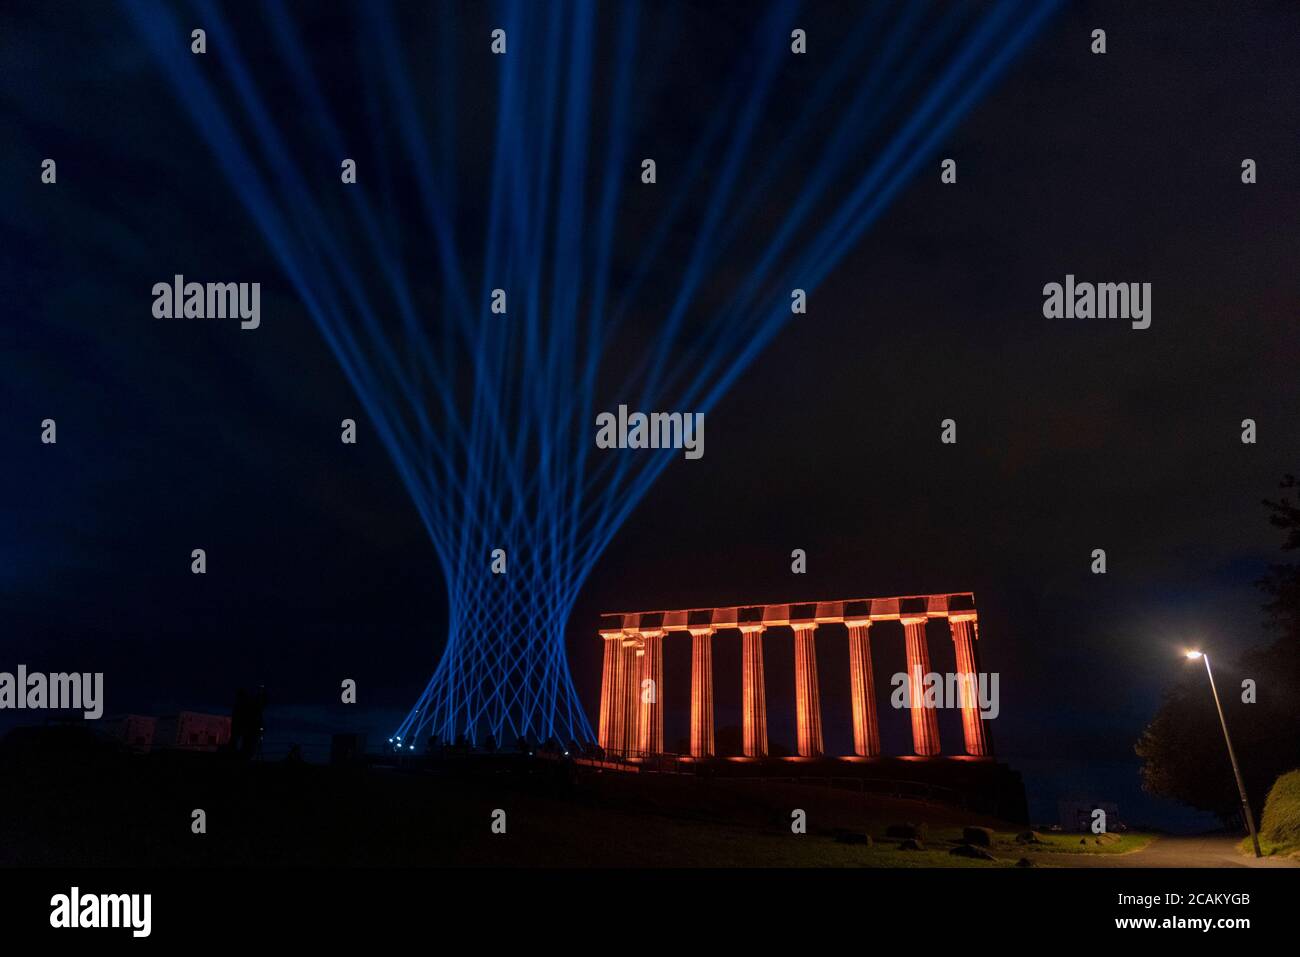 Edinburgh, Scotland, UK. Friday 7th of August 2020: Edinburgh international Festival. The view from Calton Hill as the city skyline is illuminated by over 260 beams of light marking what would have been the opening weekend of the 2020 Edinburgh International Festival.   Calton Hill is one of 13 landmarks across the city to be illuminated as part of an outdoor light installation created by Edinburgh International Festival Stock Photo